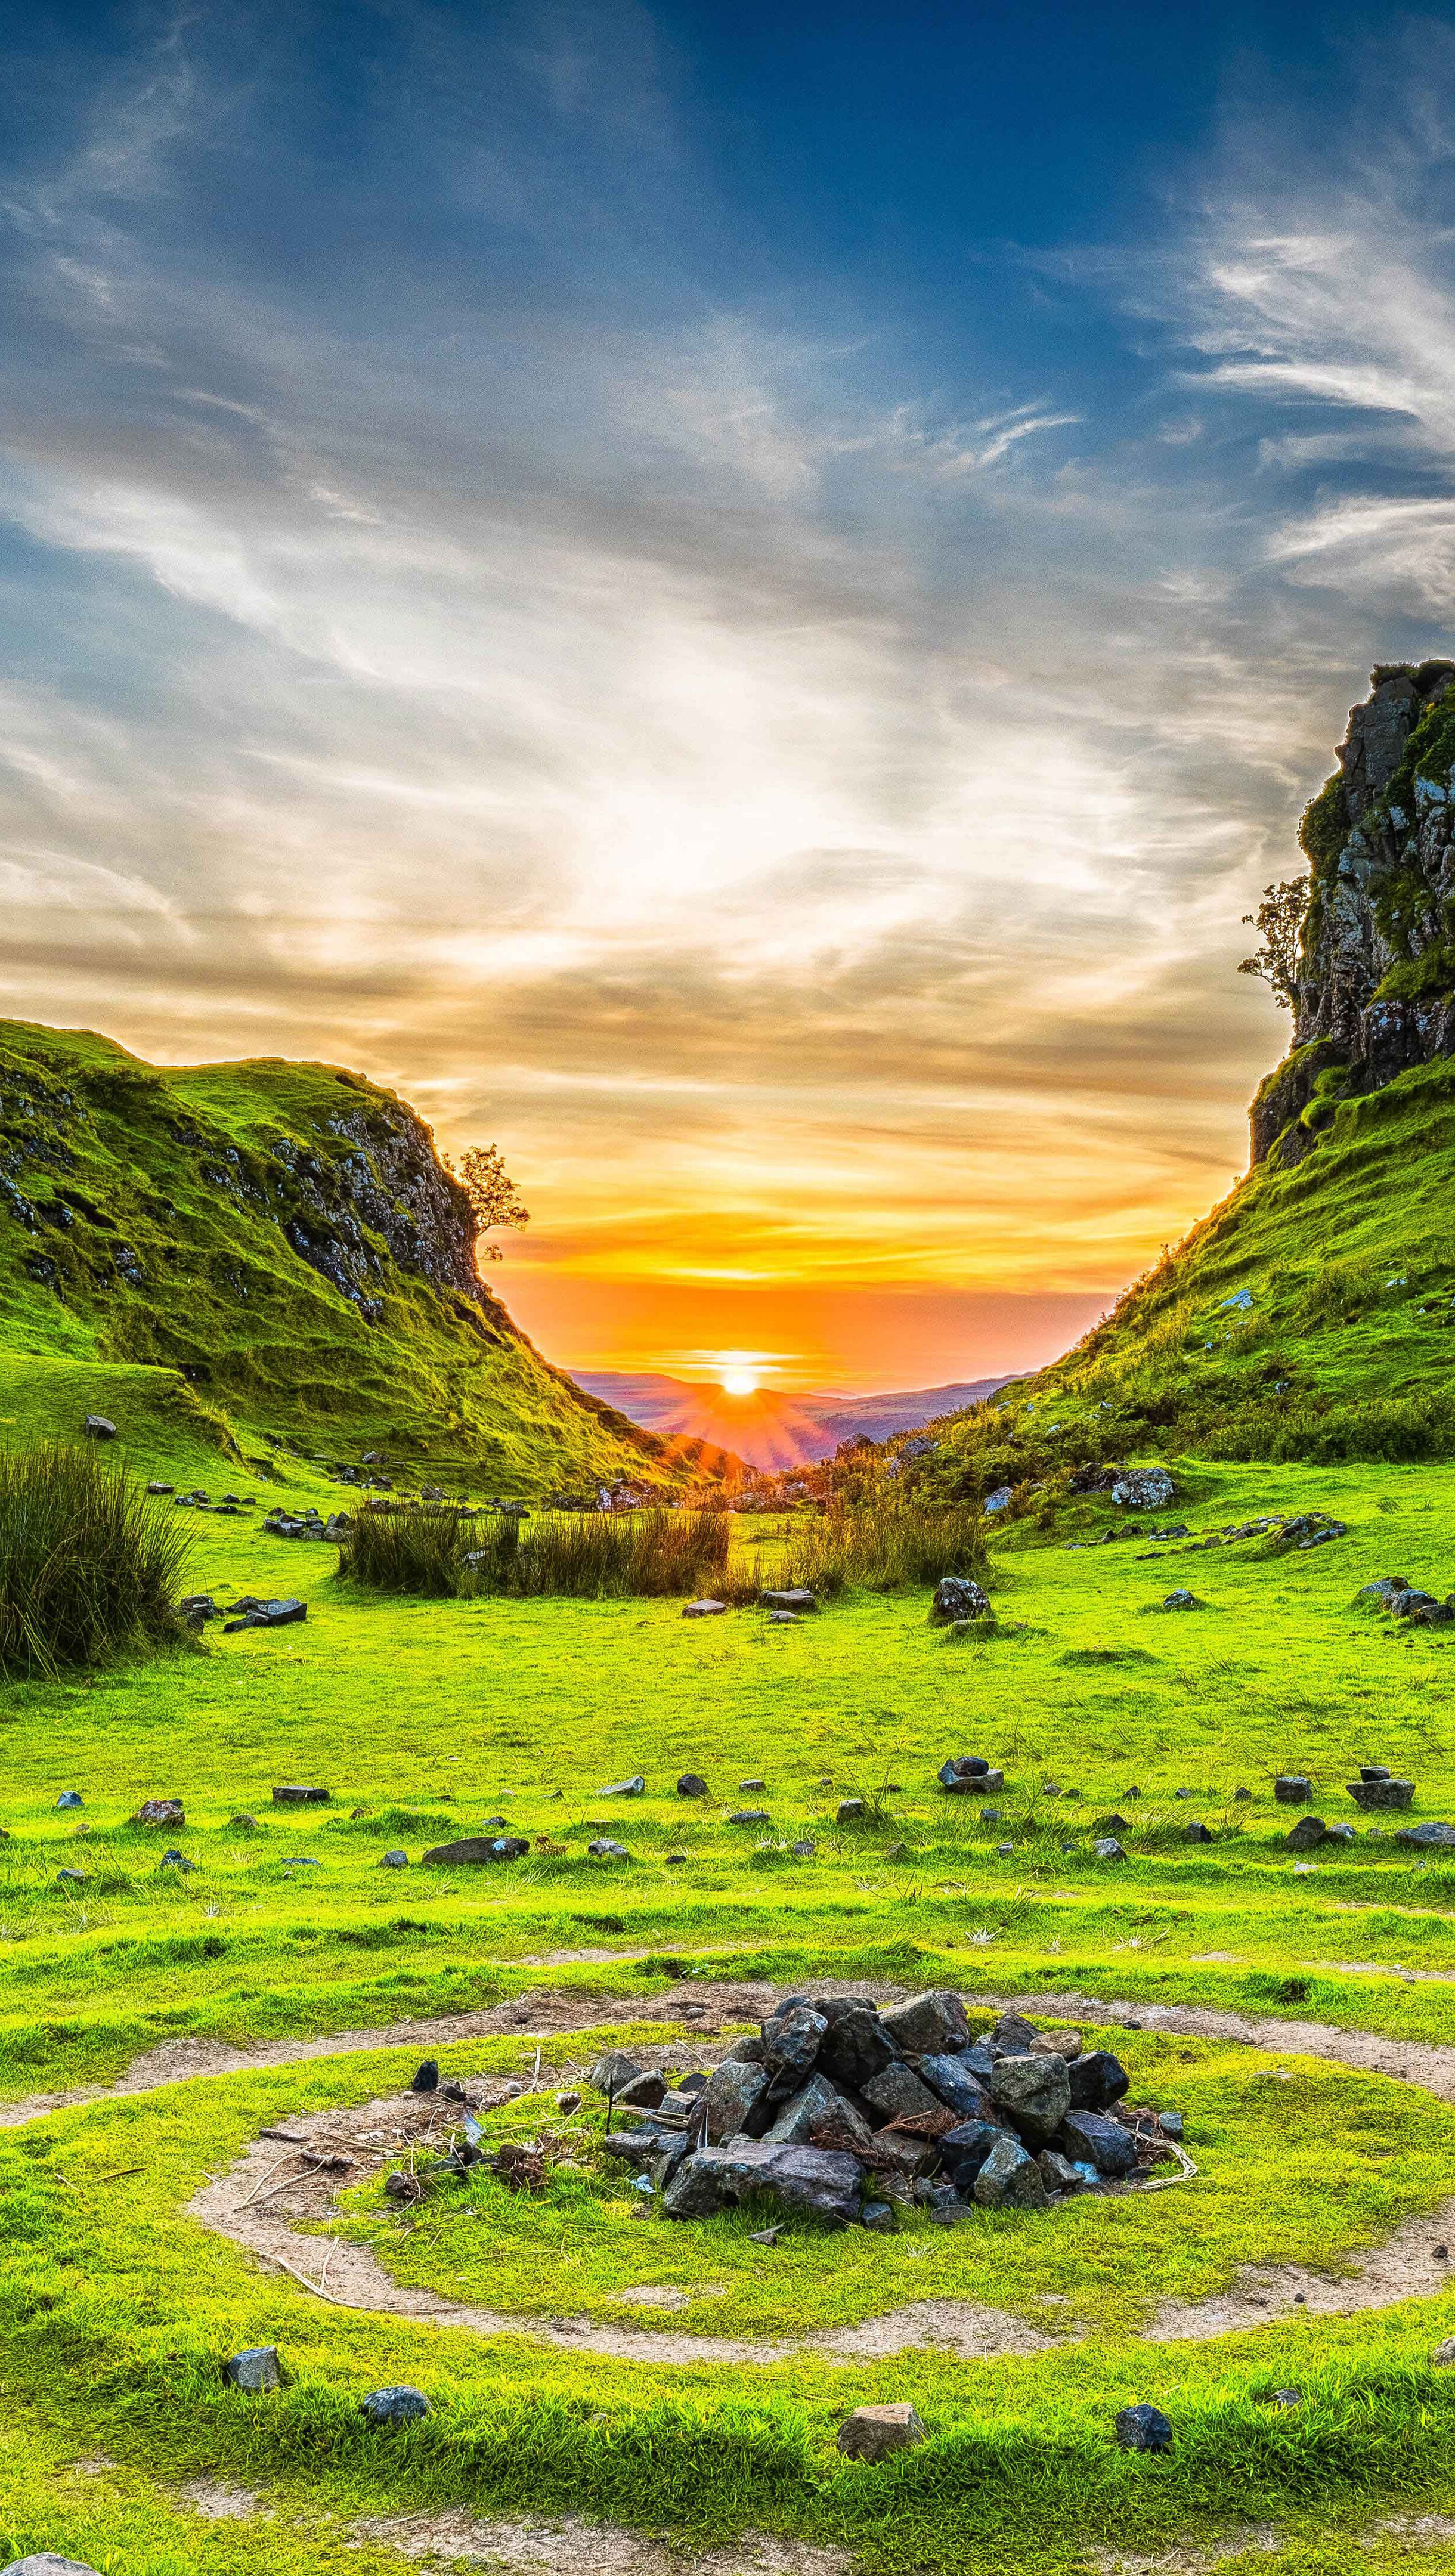 Sunrise in the contryside of the United Kingdom Wallpaper 8k Ultra HD